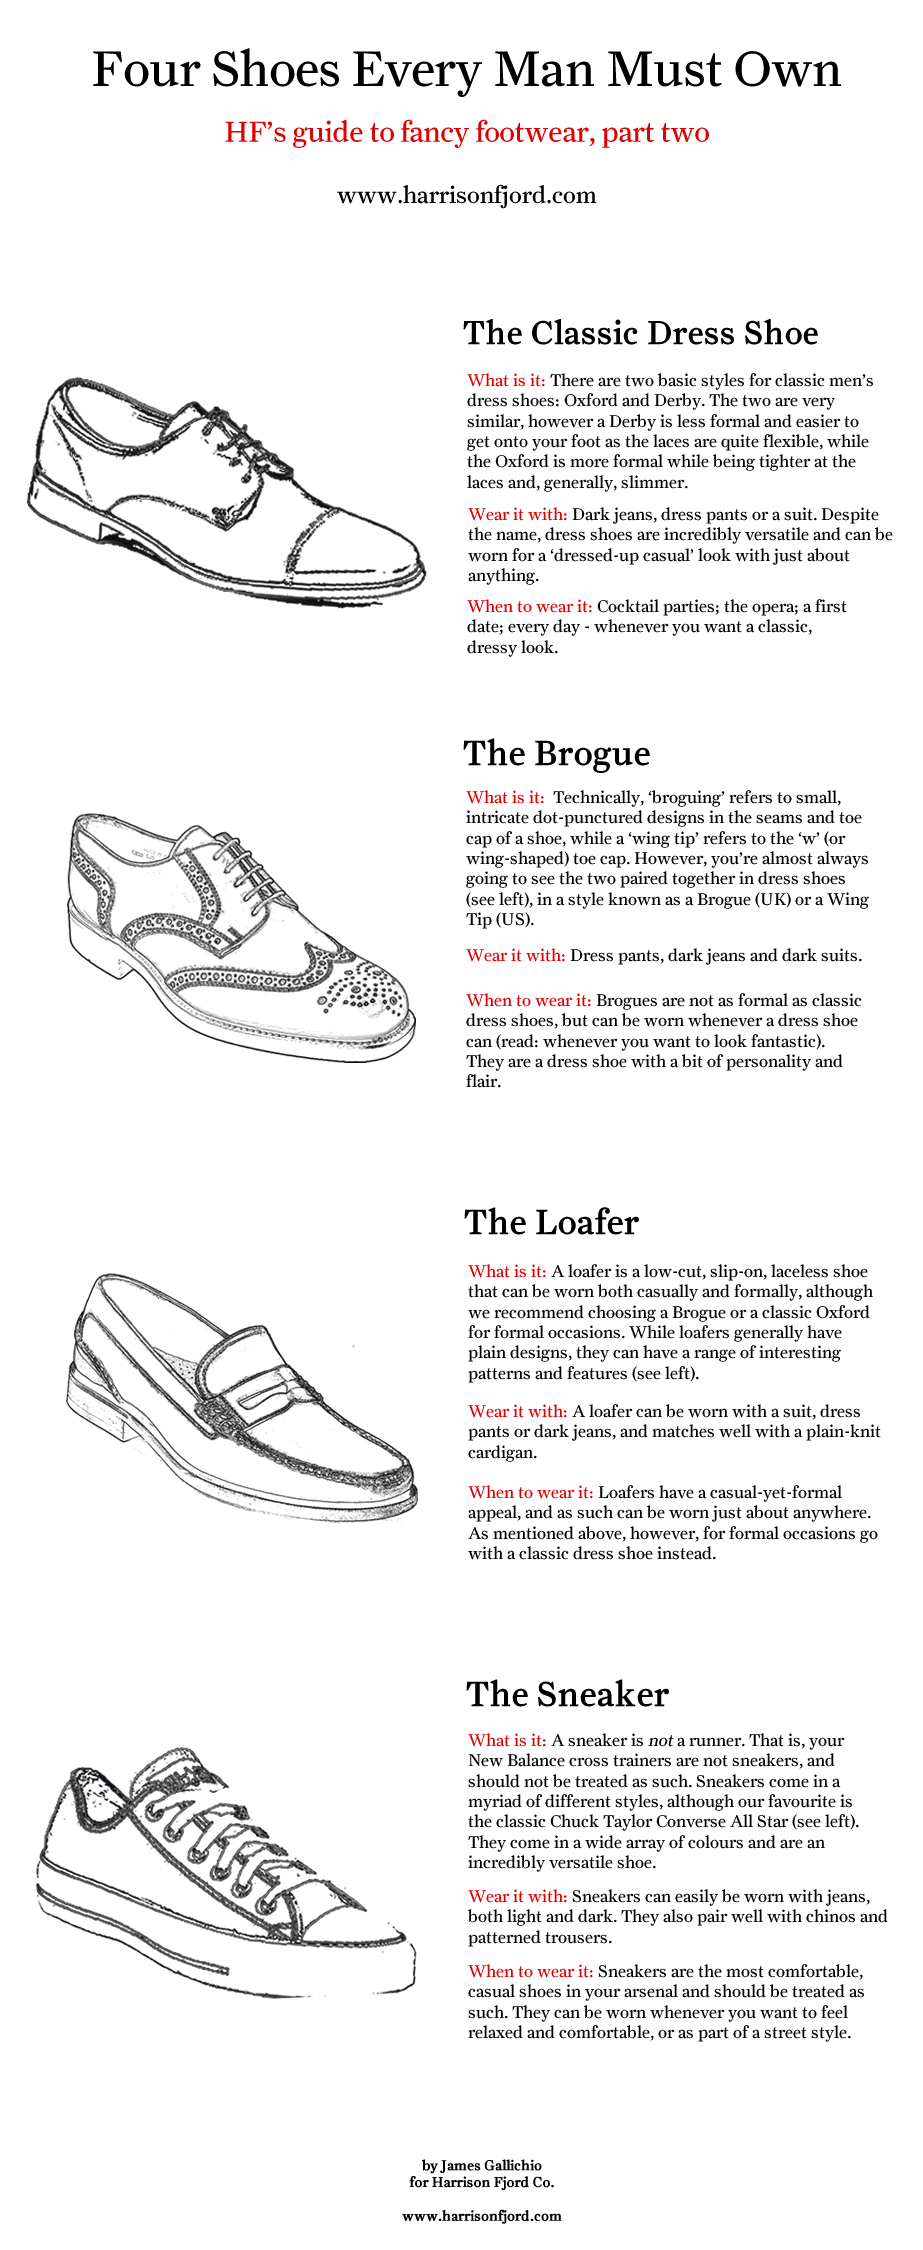 Four shoes every man should own